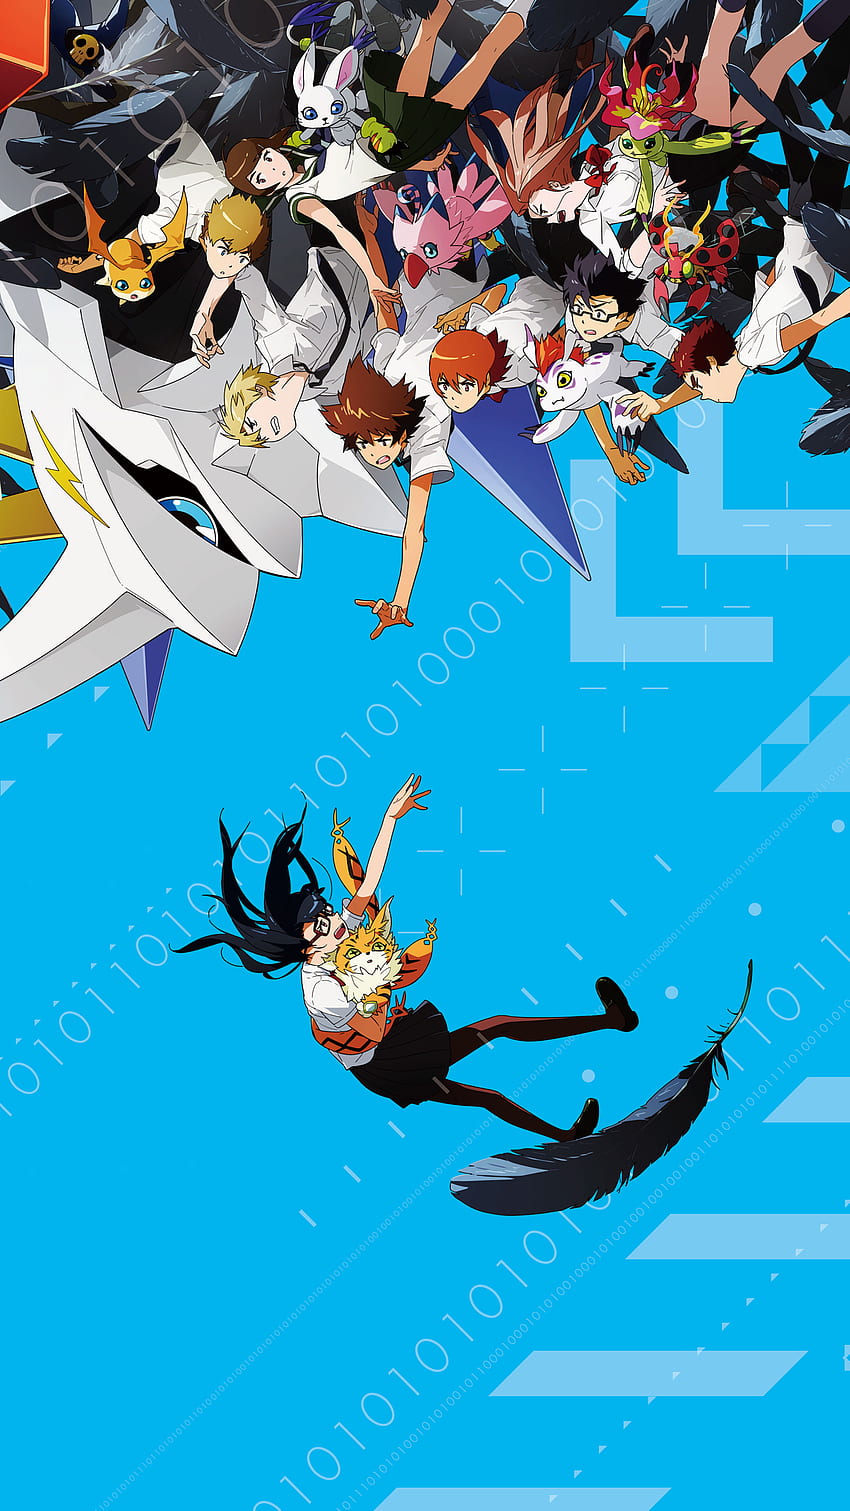 Does anyone have this without words for a phone lock screen, Digimon HD phone wallpaper